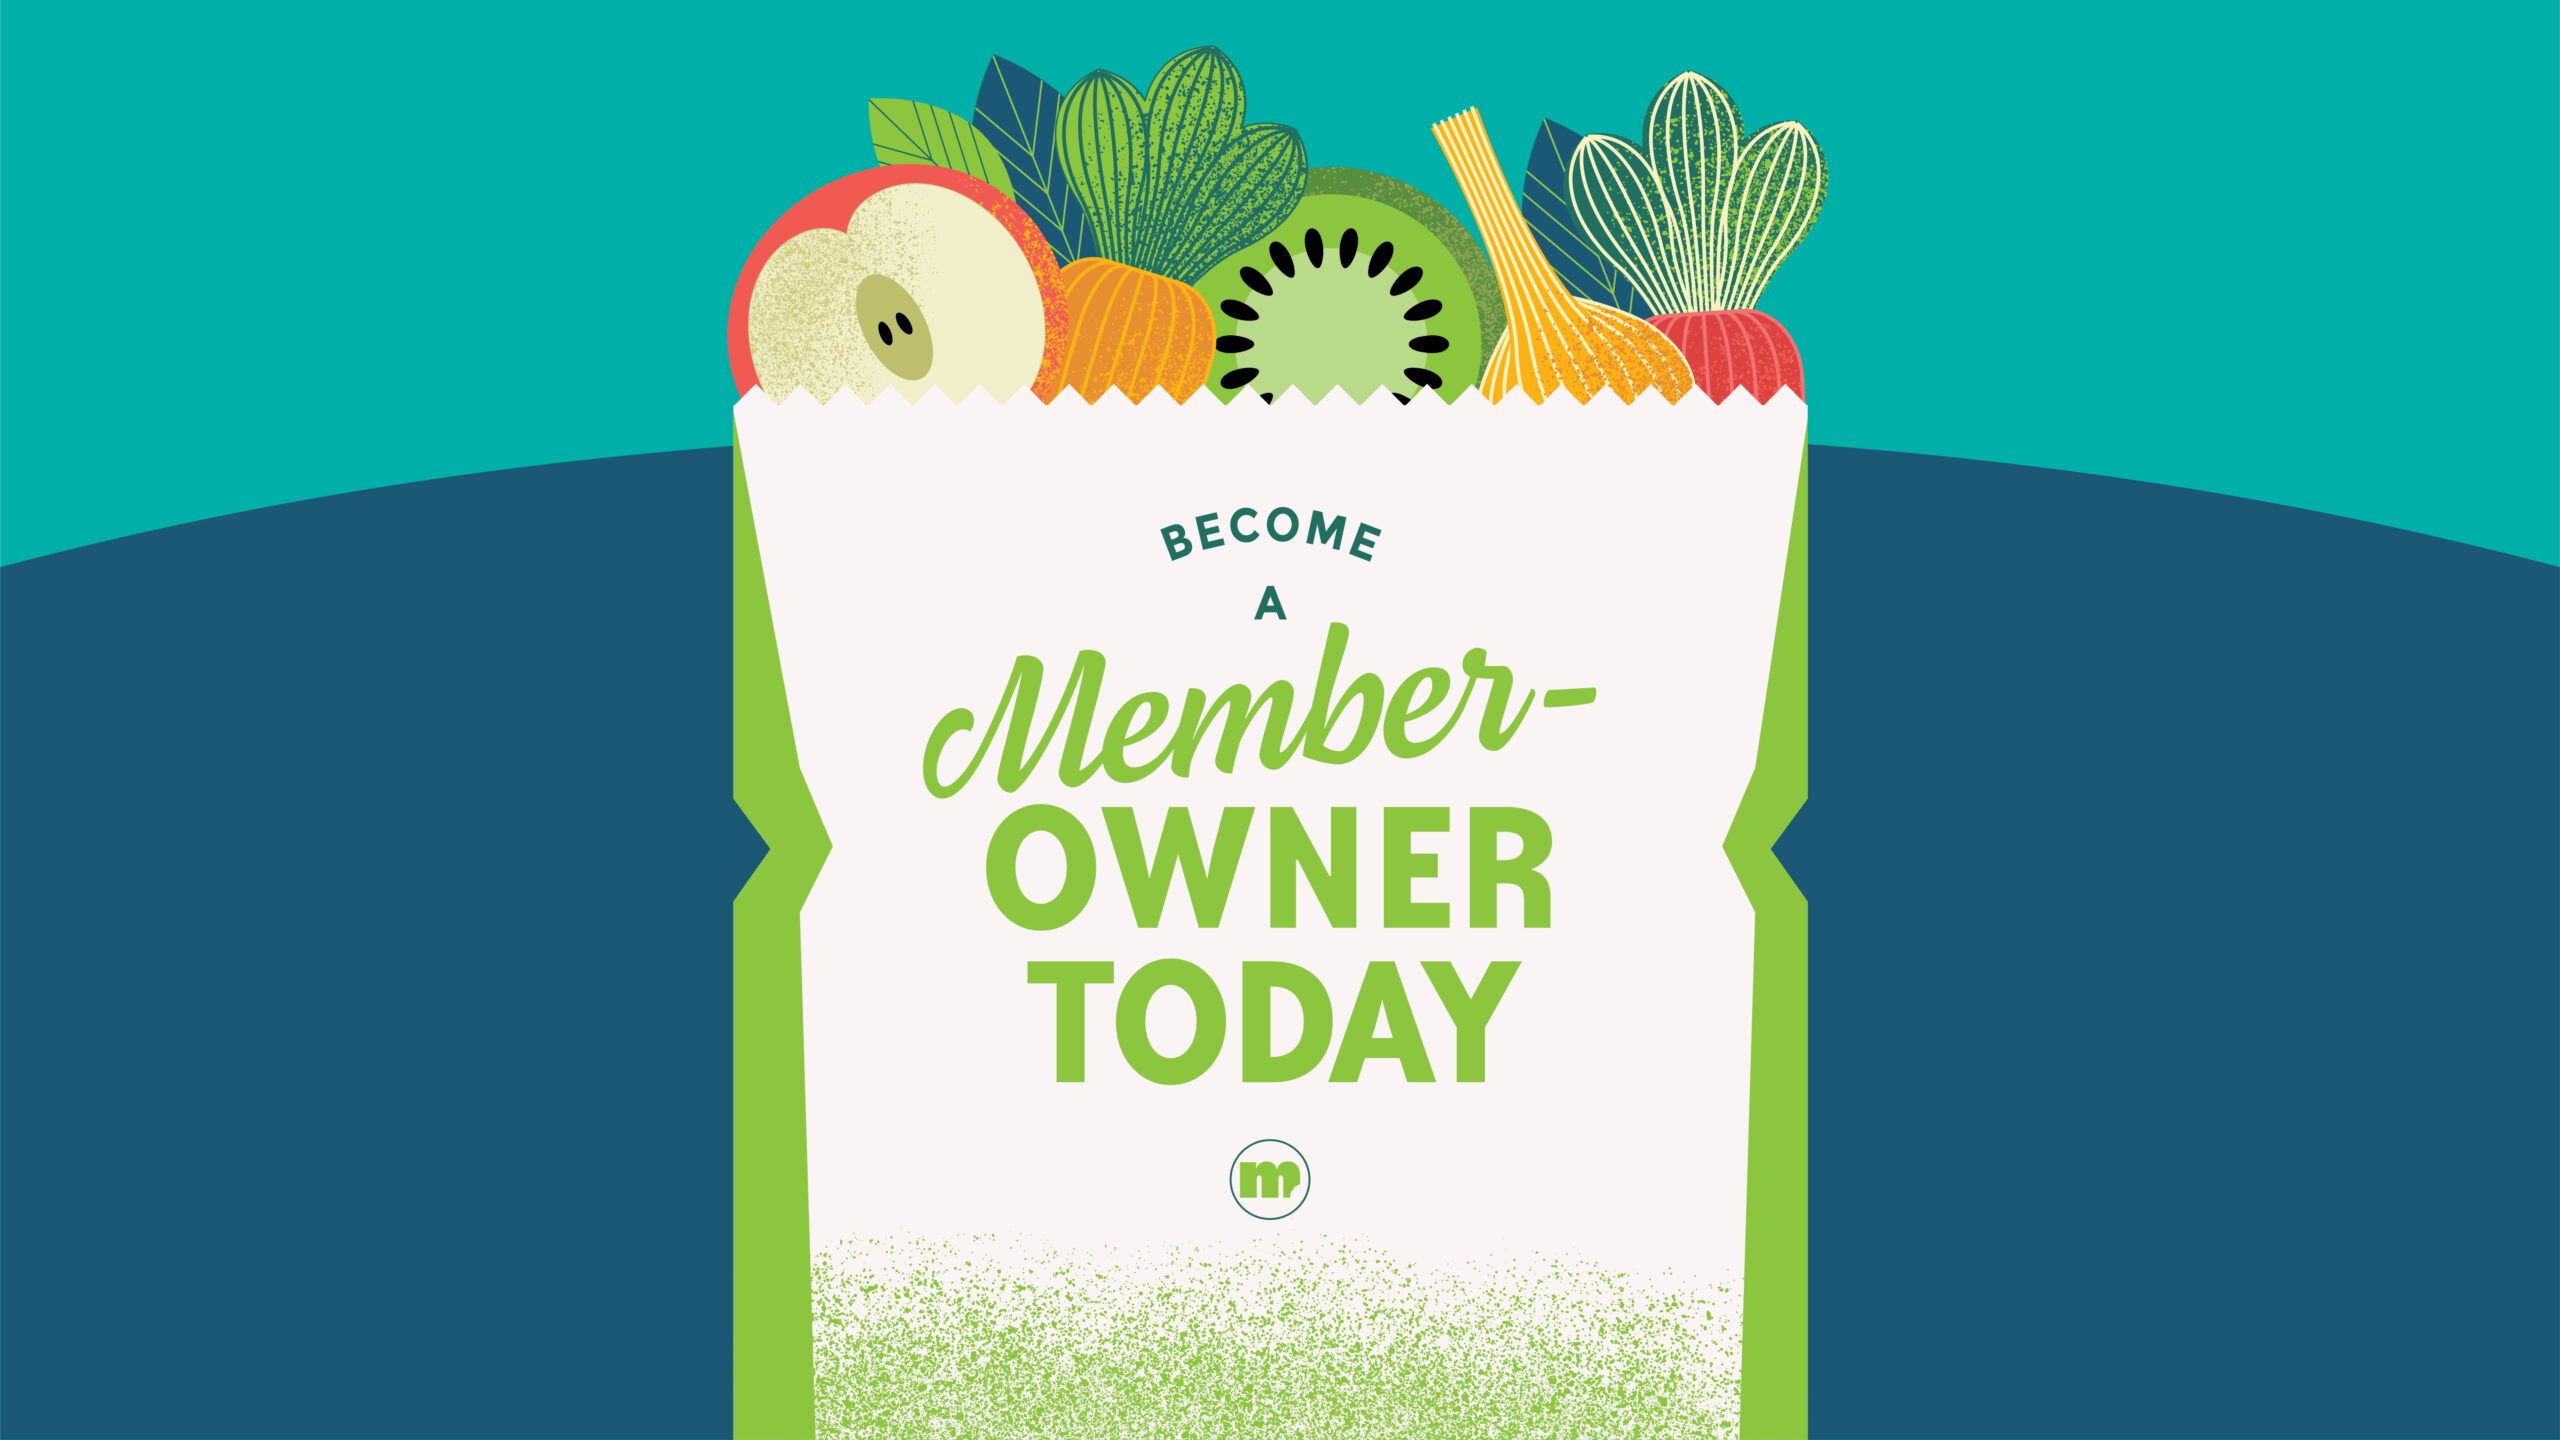 Image for Join the Co-op During Our Annual Member Drive!